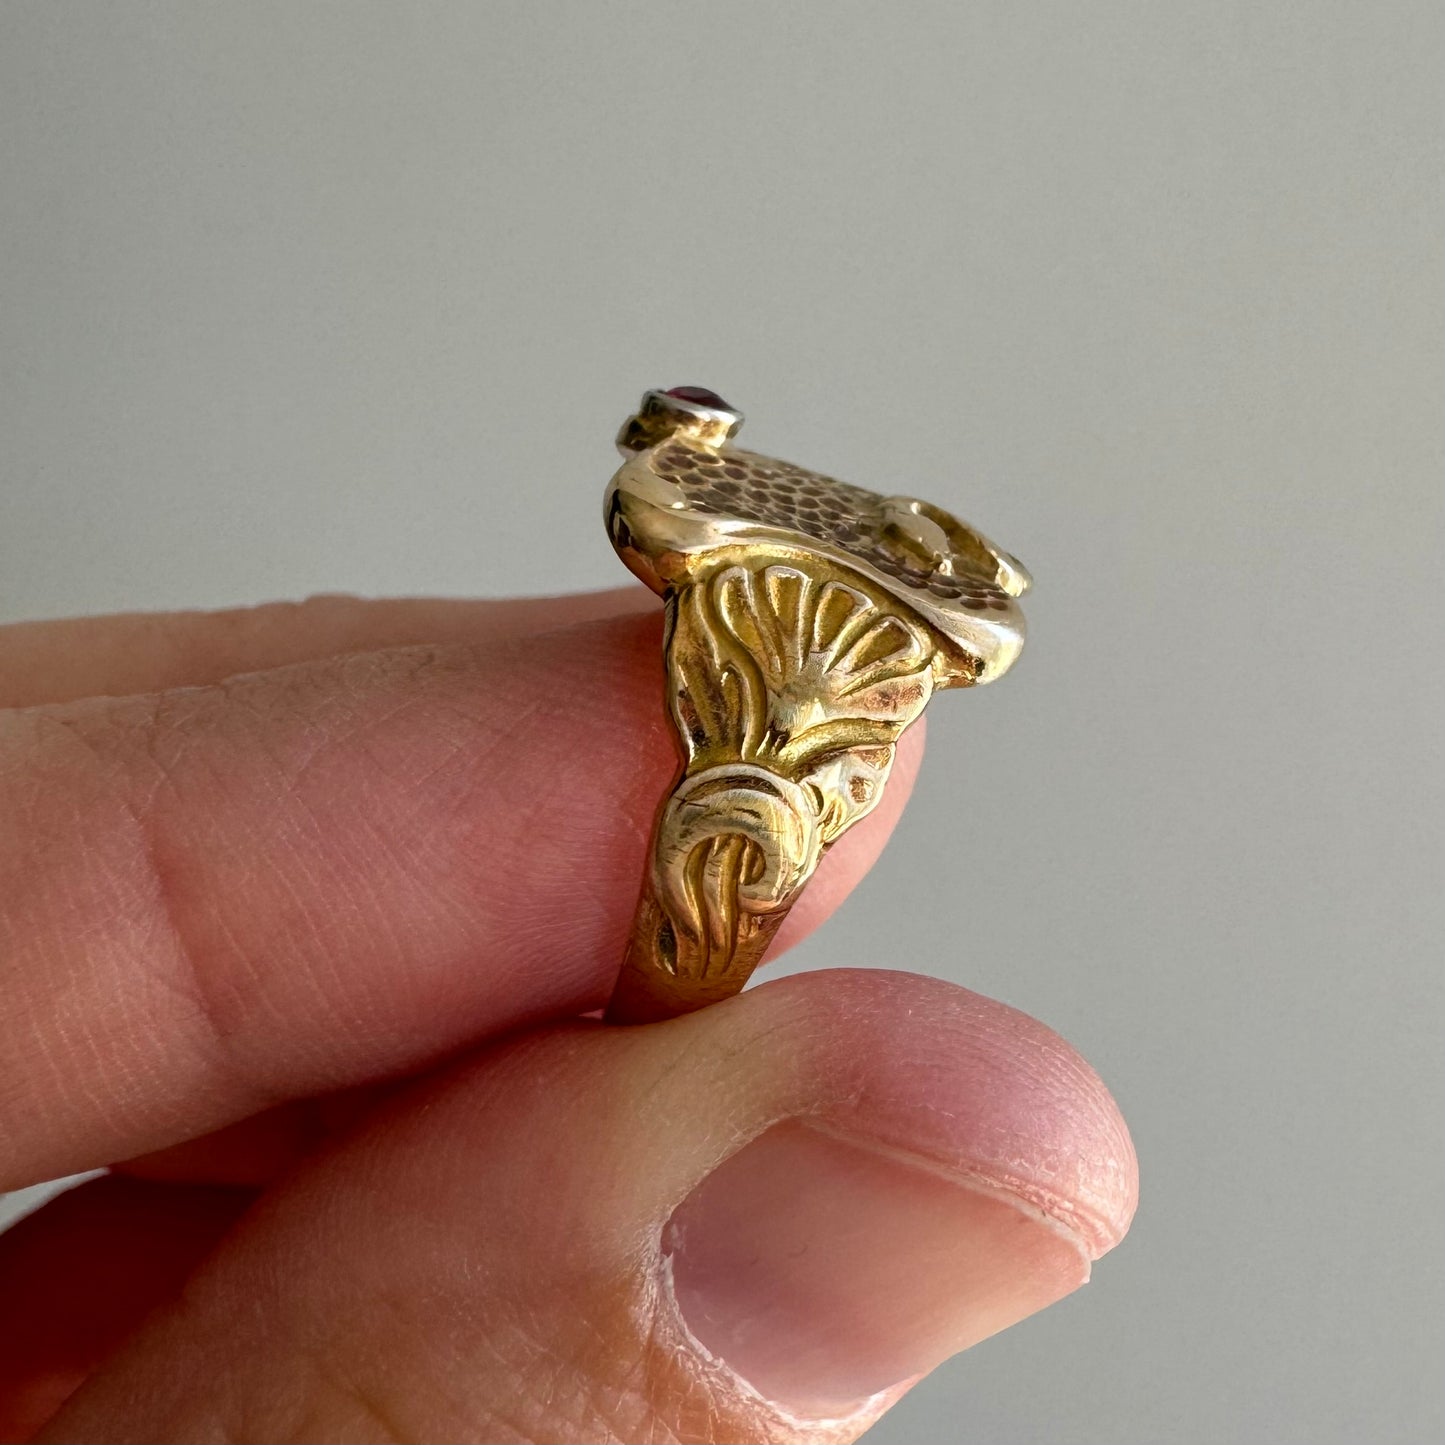 A N T I Q U E // a snake and her fungi / 14k JR Wood signet with nouveau mushrooms and a slithering snake / size 5.5